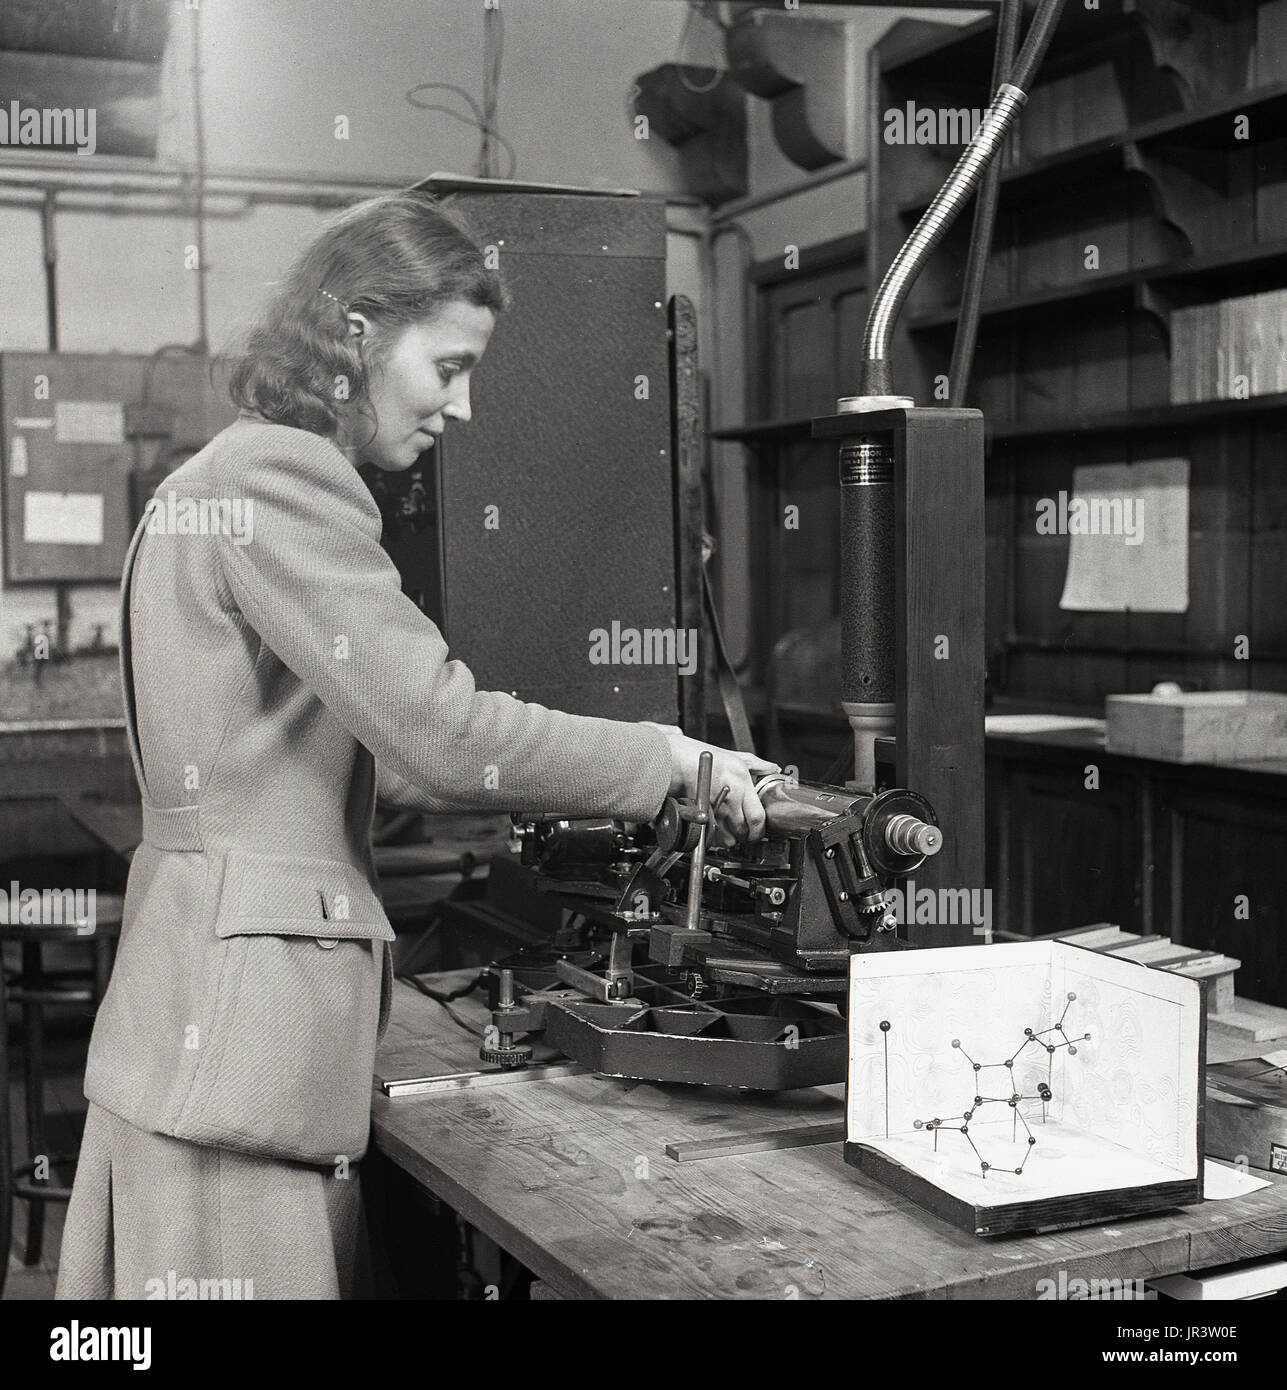 1951, historical, female mathematician in white coat at a workbench doing calculations in a work book using, a ruler, a slide-rule and a ball and stick model, England, UK. Stock Photo